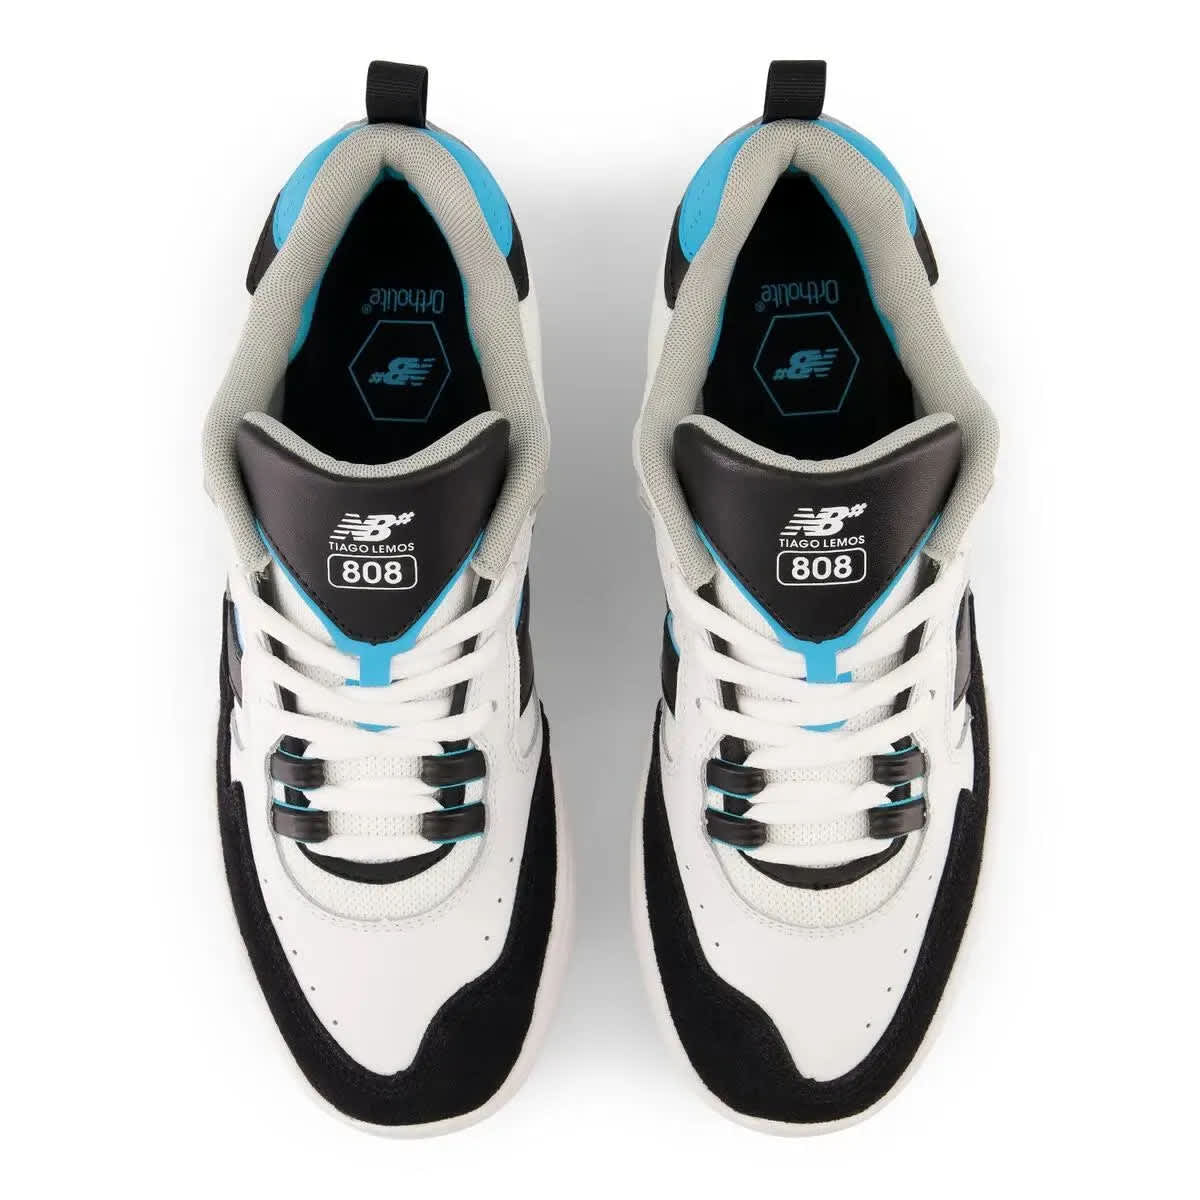 White/Teal NM808BYS NB Numeric Tiago Skate Shoe Top